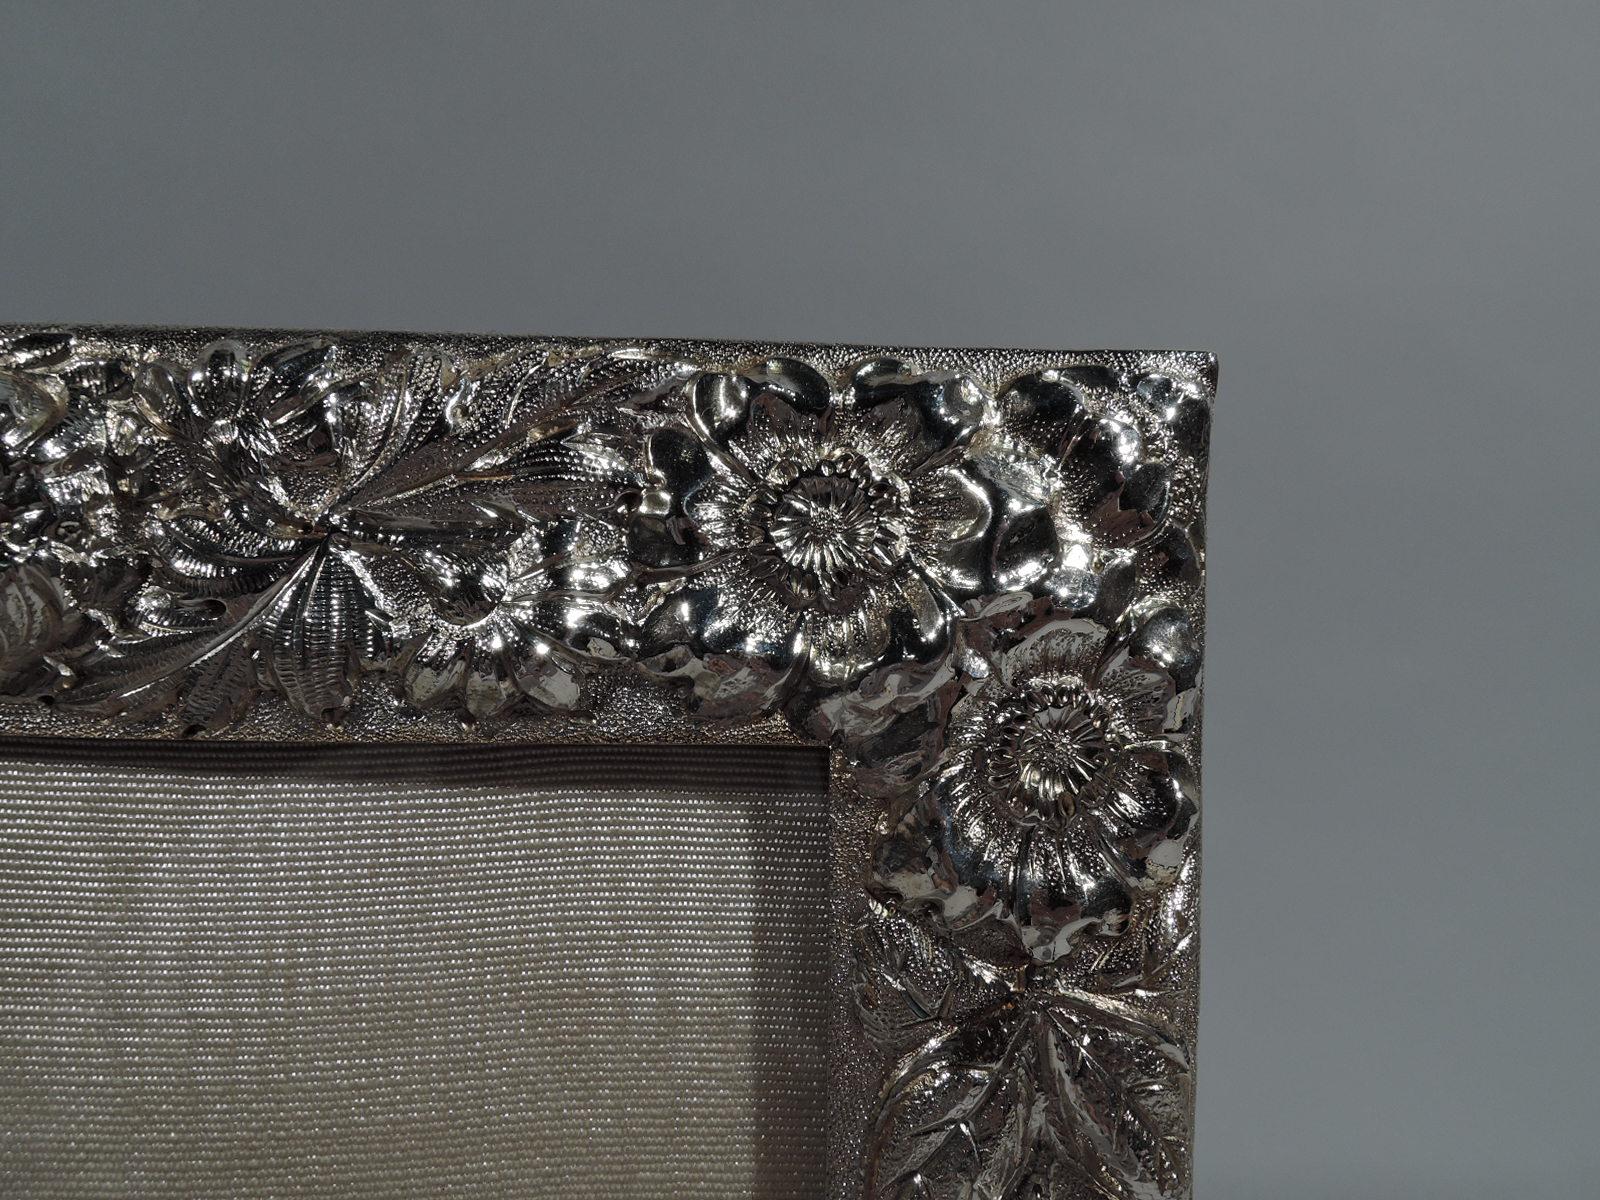 Beautifully ornate sterling silver picture frame. Made by Stieff in Baltimore in 1925. Rectangular window and repousse floral surround with abundant blooms. Interlaced script monogram engraved on rail top. A great piece by a premier regional maker.